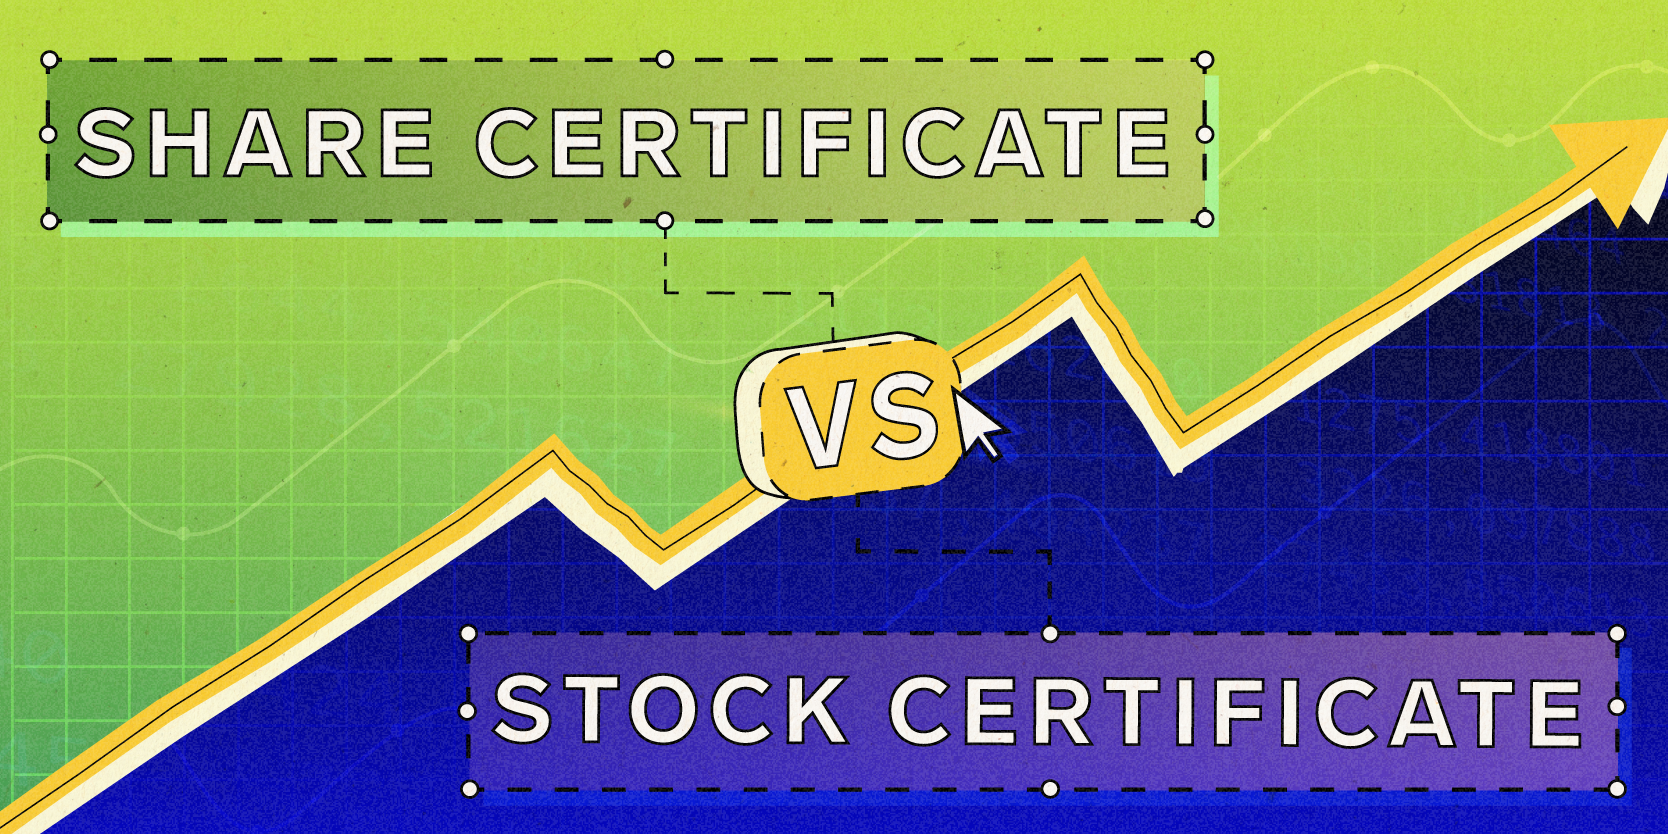 Share certificate vs stock certificate, divided by an upwards trending arrow on investing themed background